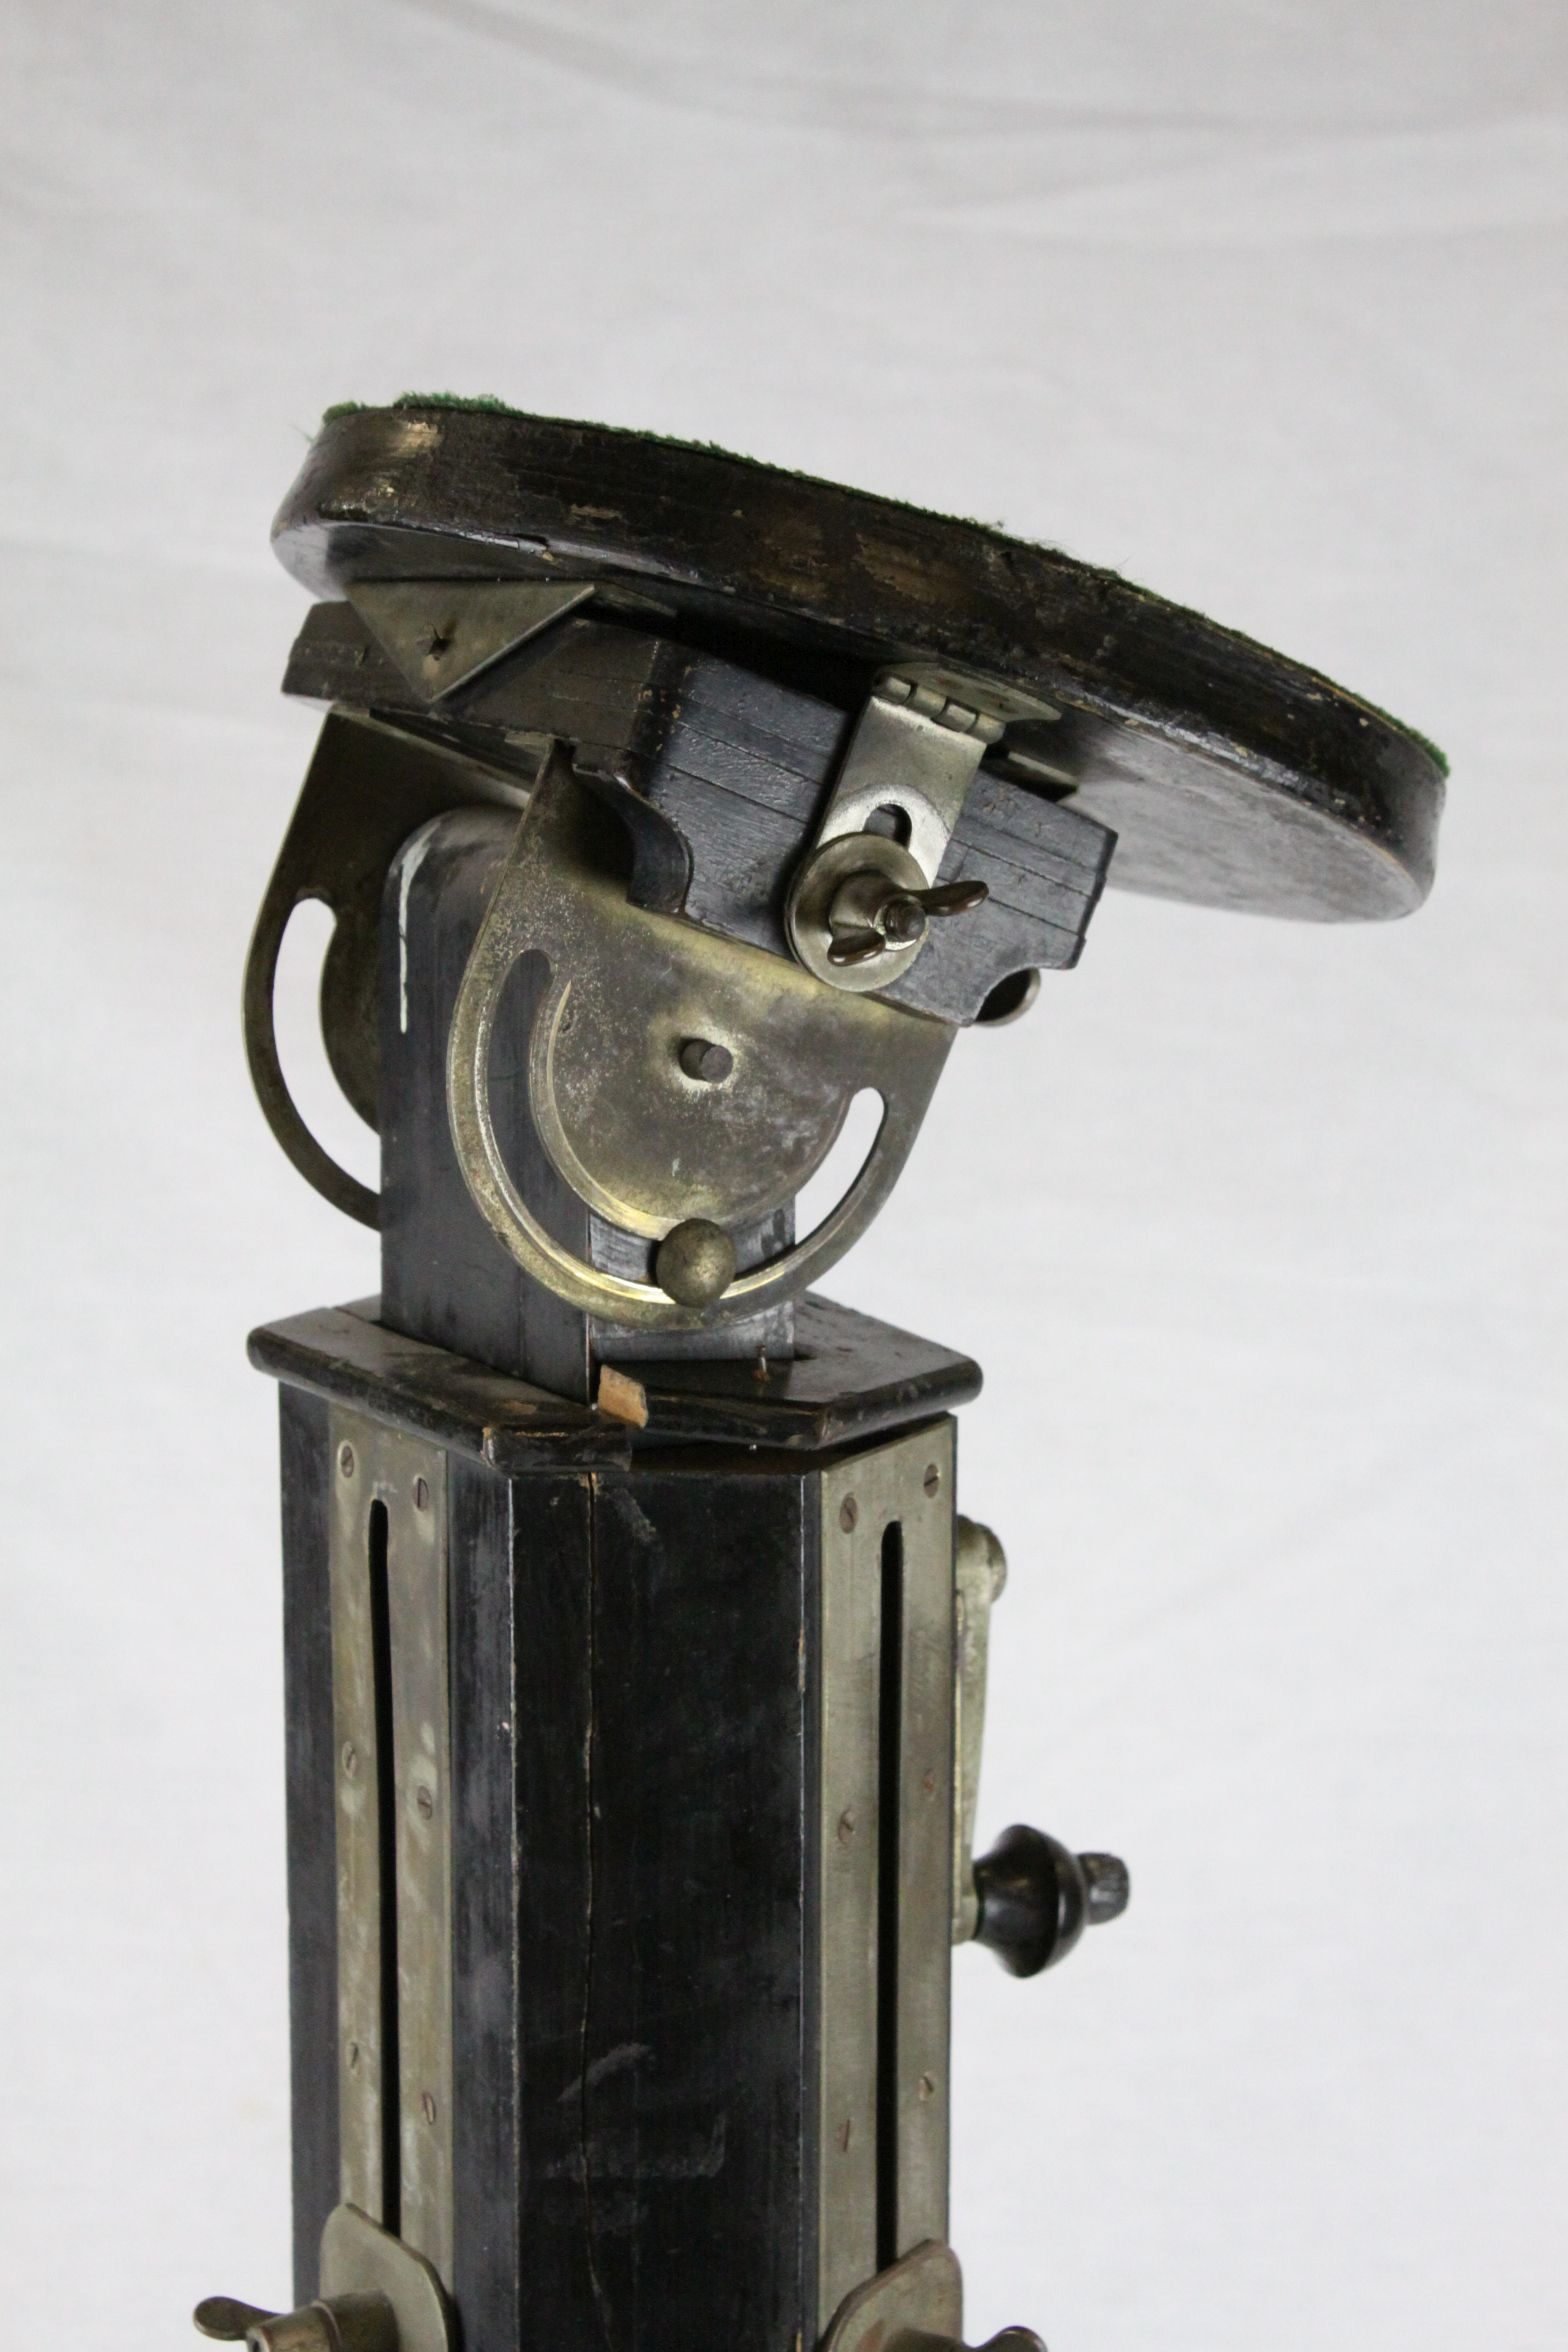 Early 20th century Wooden Folding Camera Tripod with Winding Handle and Tilting Camera Platform - Image 2 of 6